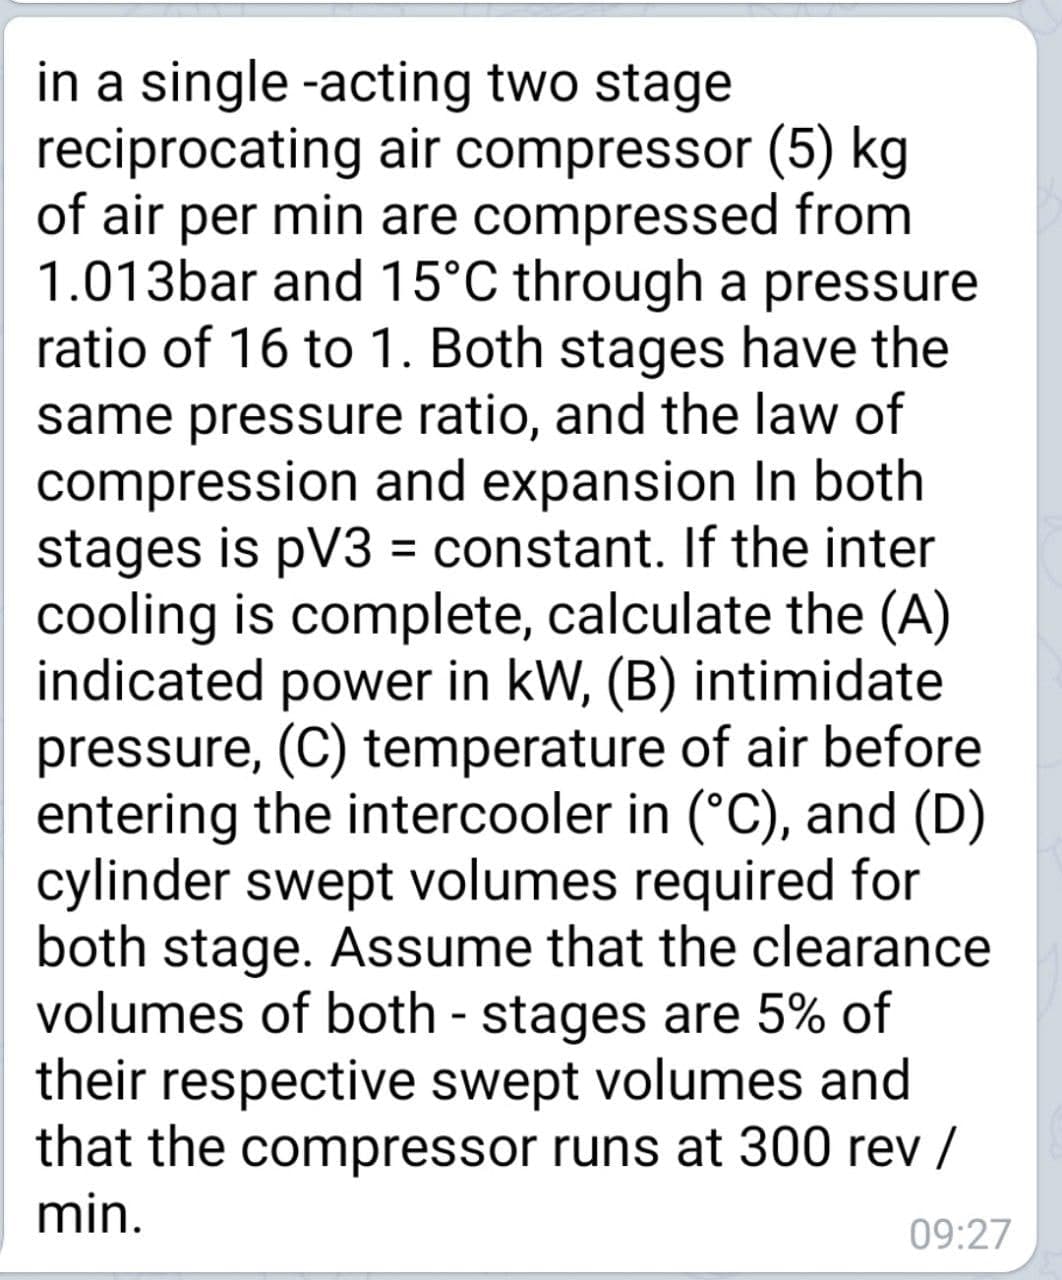 in a single -acting two stage
reciprocating air compressor (5) kg
of air per min are compressed from
1.013bar and 15°C through a pressure
ratio of 16 to 1. Both stages have the
same pressure ratio, and the law of
compression and expansion In both
stages is pV3 = constant. If the inter
cooling is complete, calculate the (A)
indicated power in kW, (B) intimidate
pressure, (C) temperature of air before
entering the intercooler in (°C), and (D)
cylinder swept volumes required for
both stage. Assume that the clearance
volumes of both - stages are 5% of
their respective swept volumes and
that the compressor runs at 300 rev /
min.
09:27
